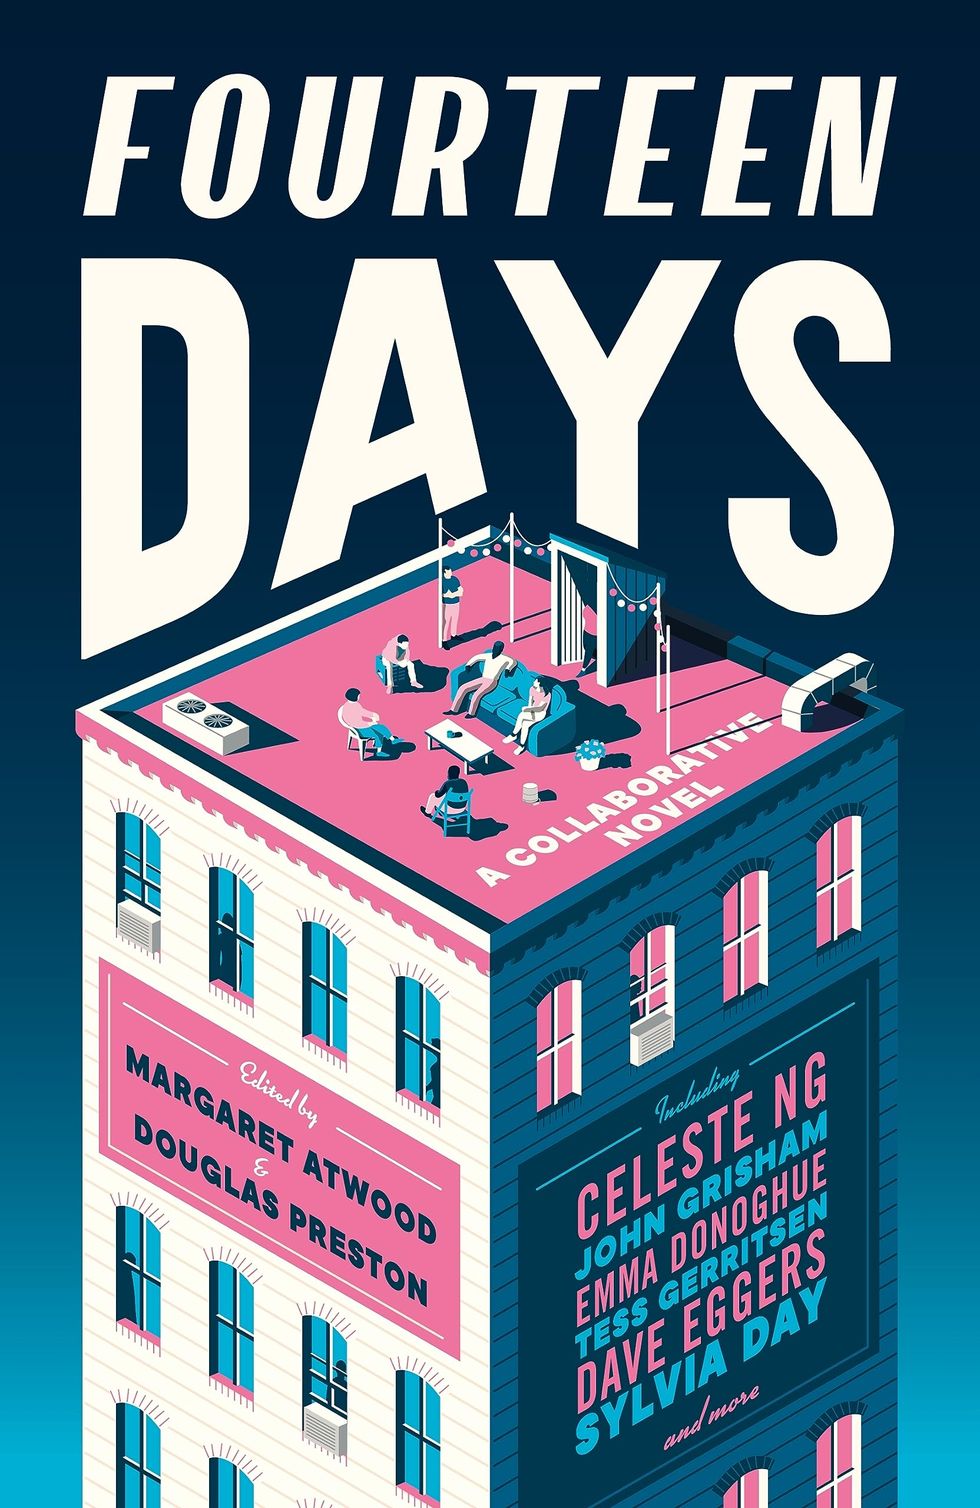 Fourteen Days: A Collaborative Novel edited by Margaret Atwood and Douglas Preston